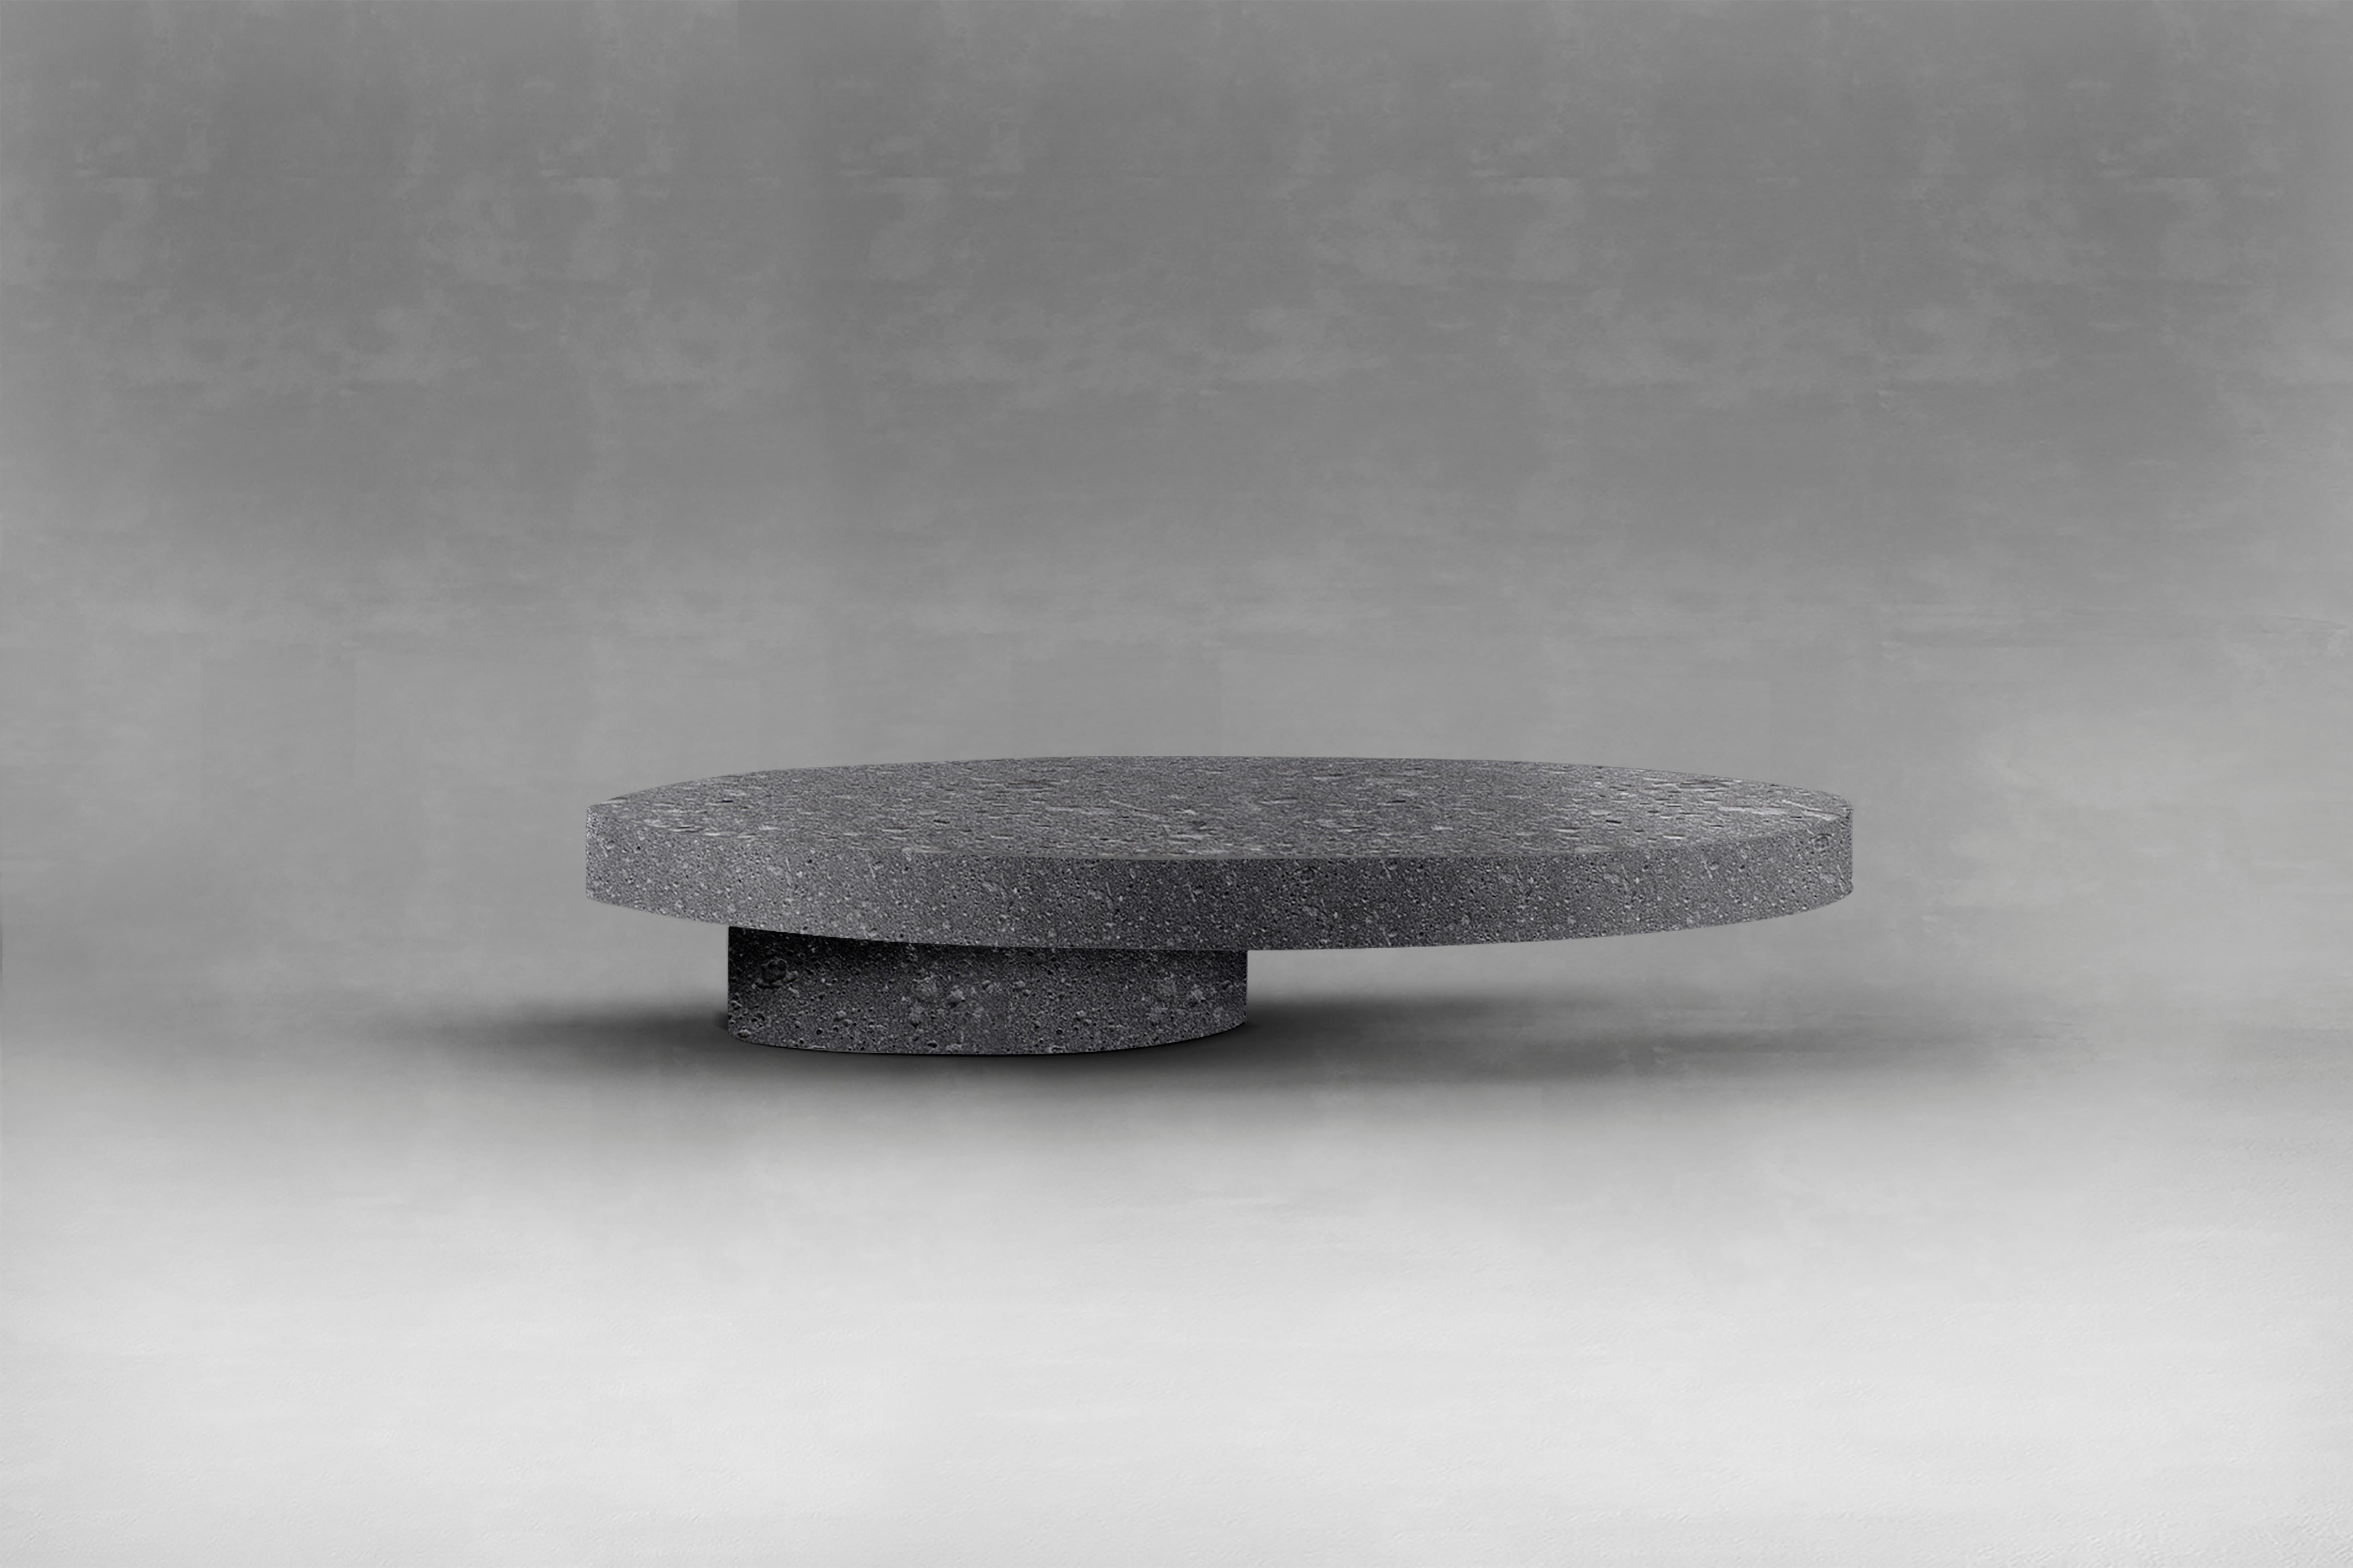 Bassa Center Table in Basalto by Collector Studio

Is like having a huge block of Basalt. This Basalt table will not only look beautifull but will also feel incredible as it is finished with a smooth finish that will cast amazing reflections and